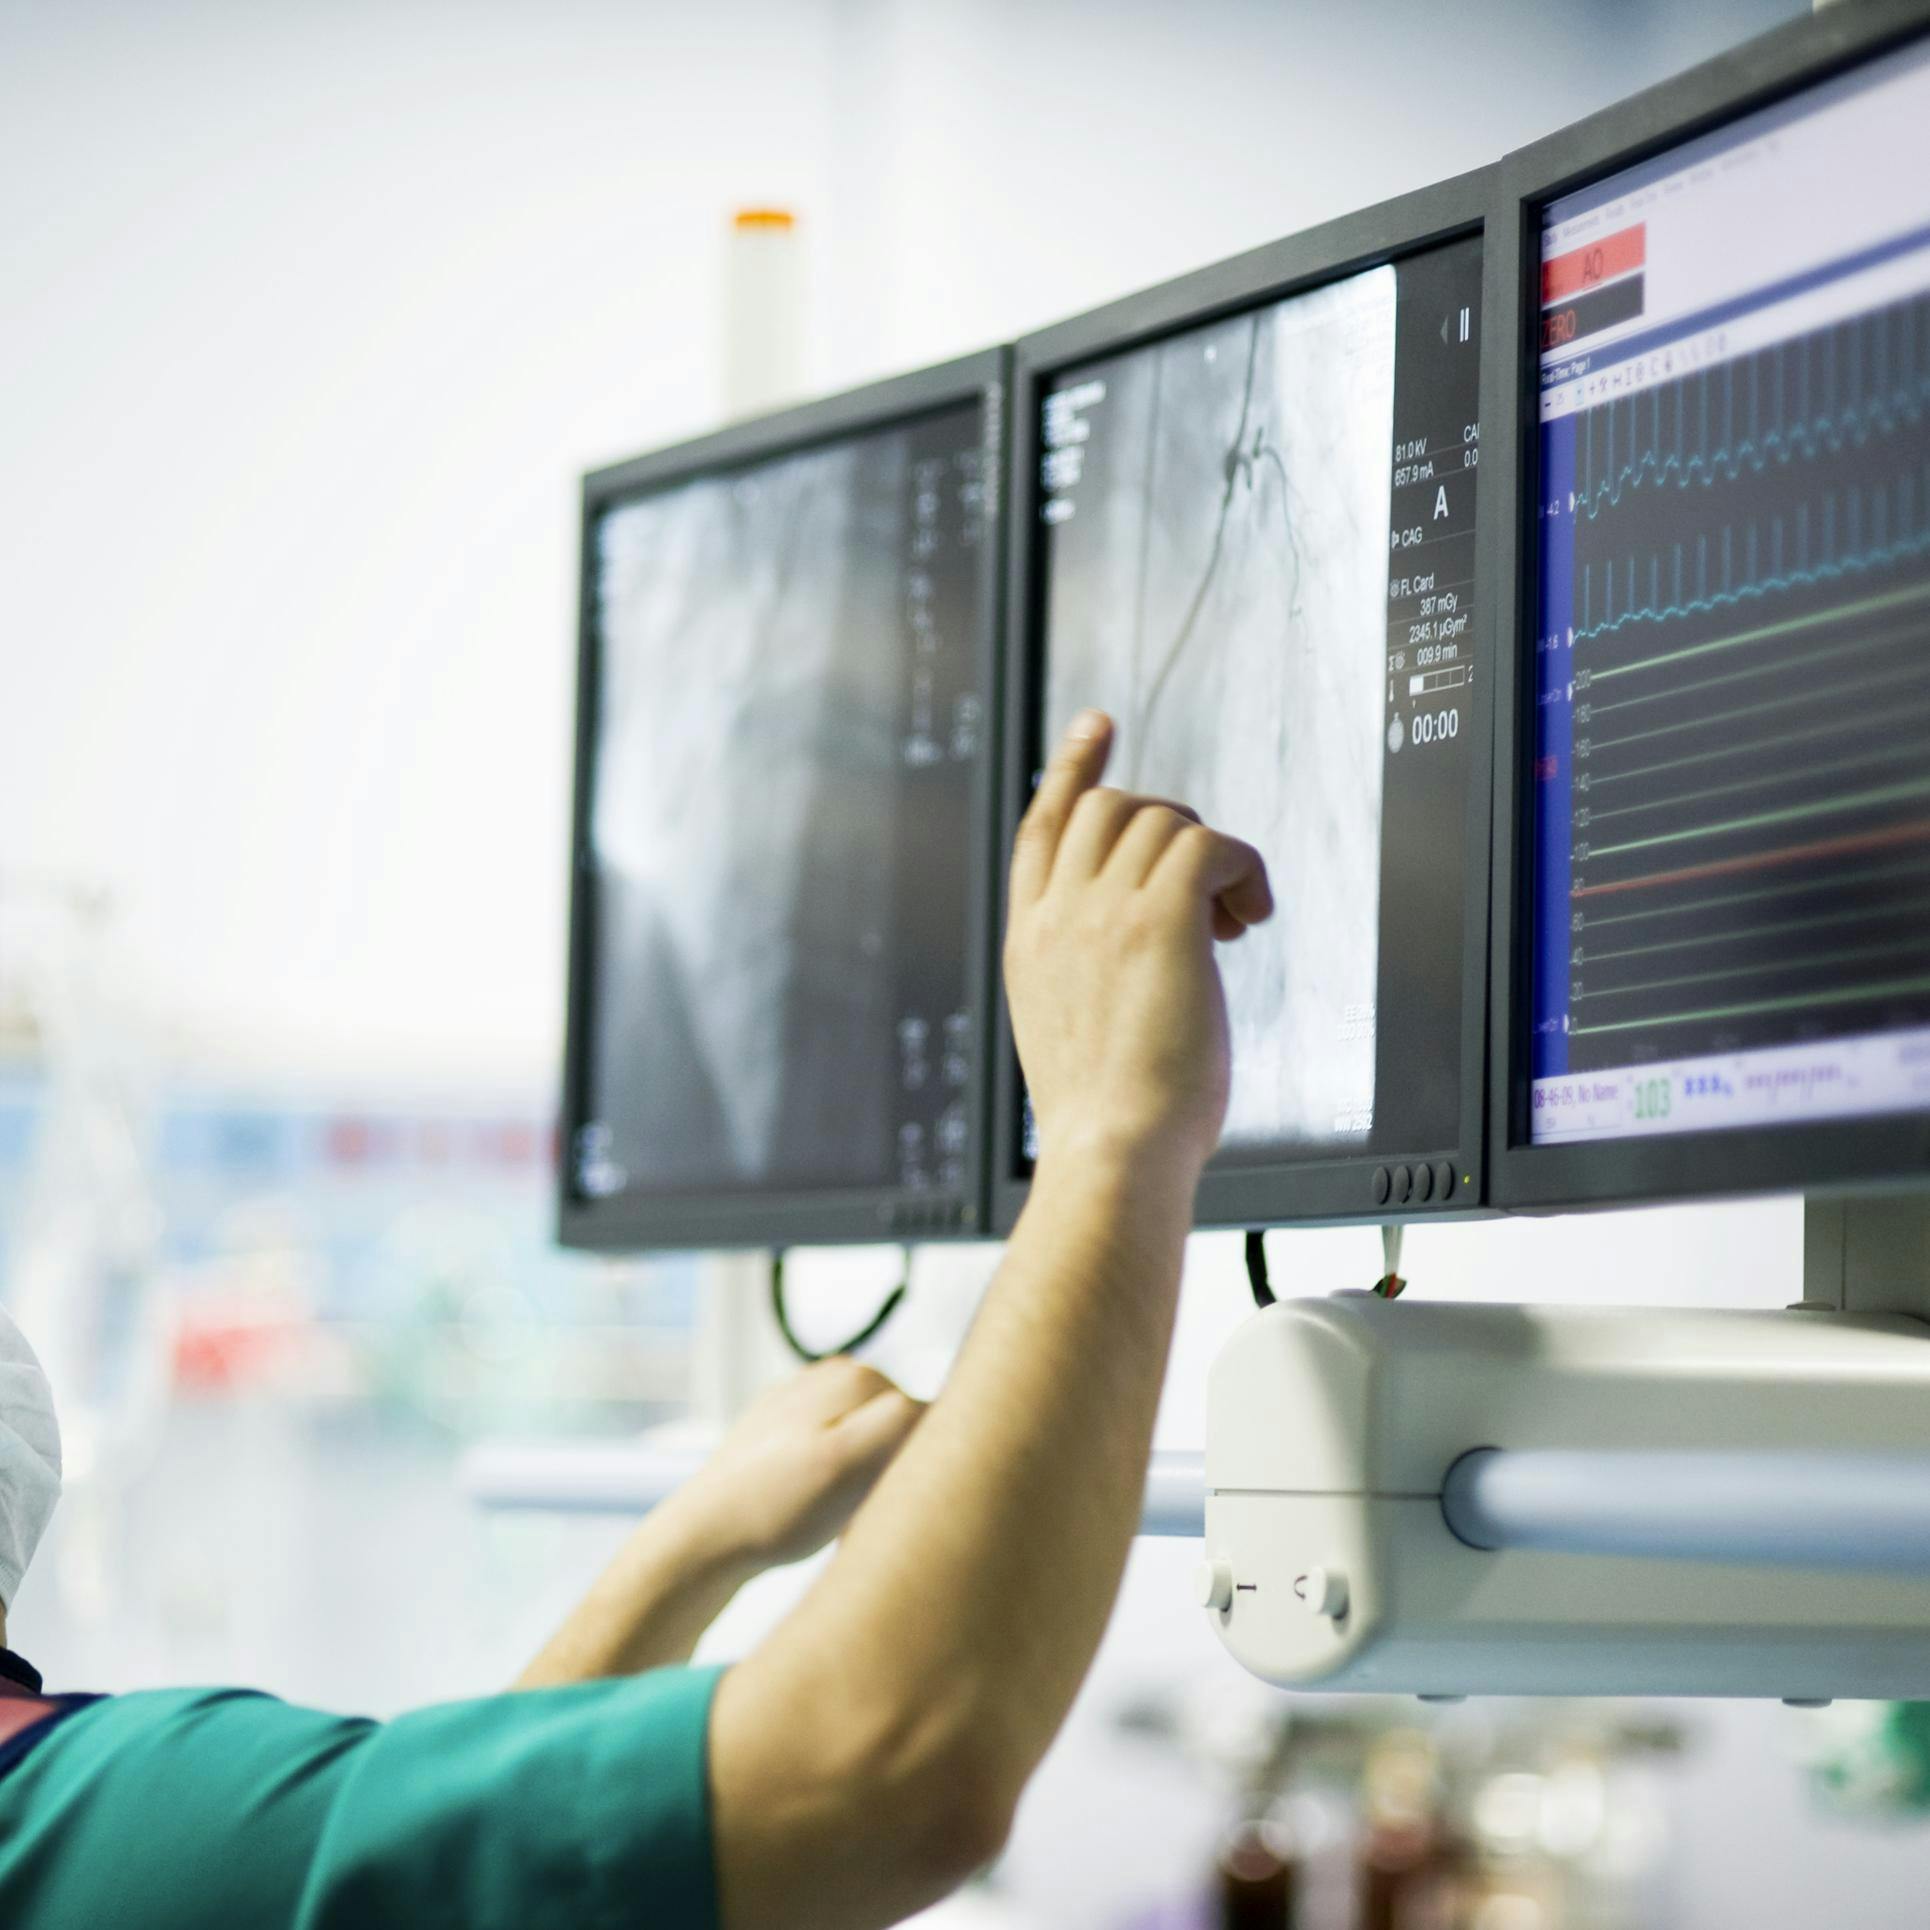 Checking images during a cath lab procedure